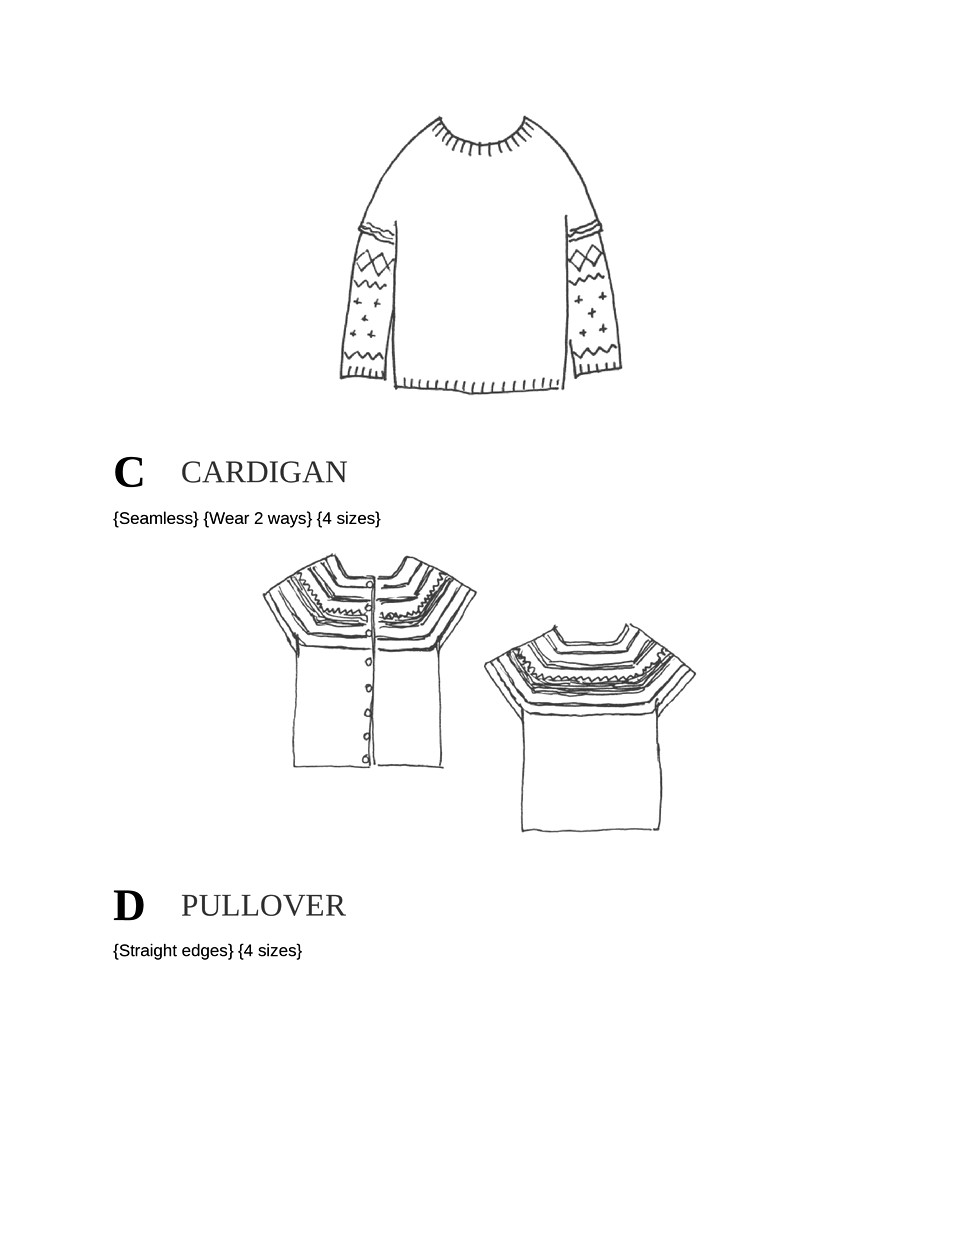 Japanese Knitting Patterns for Sweaters Scarves and More-3